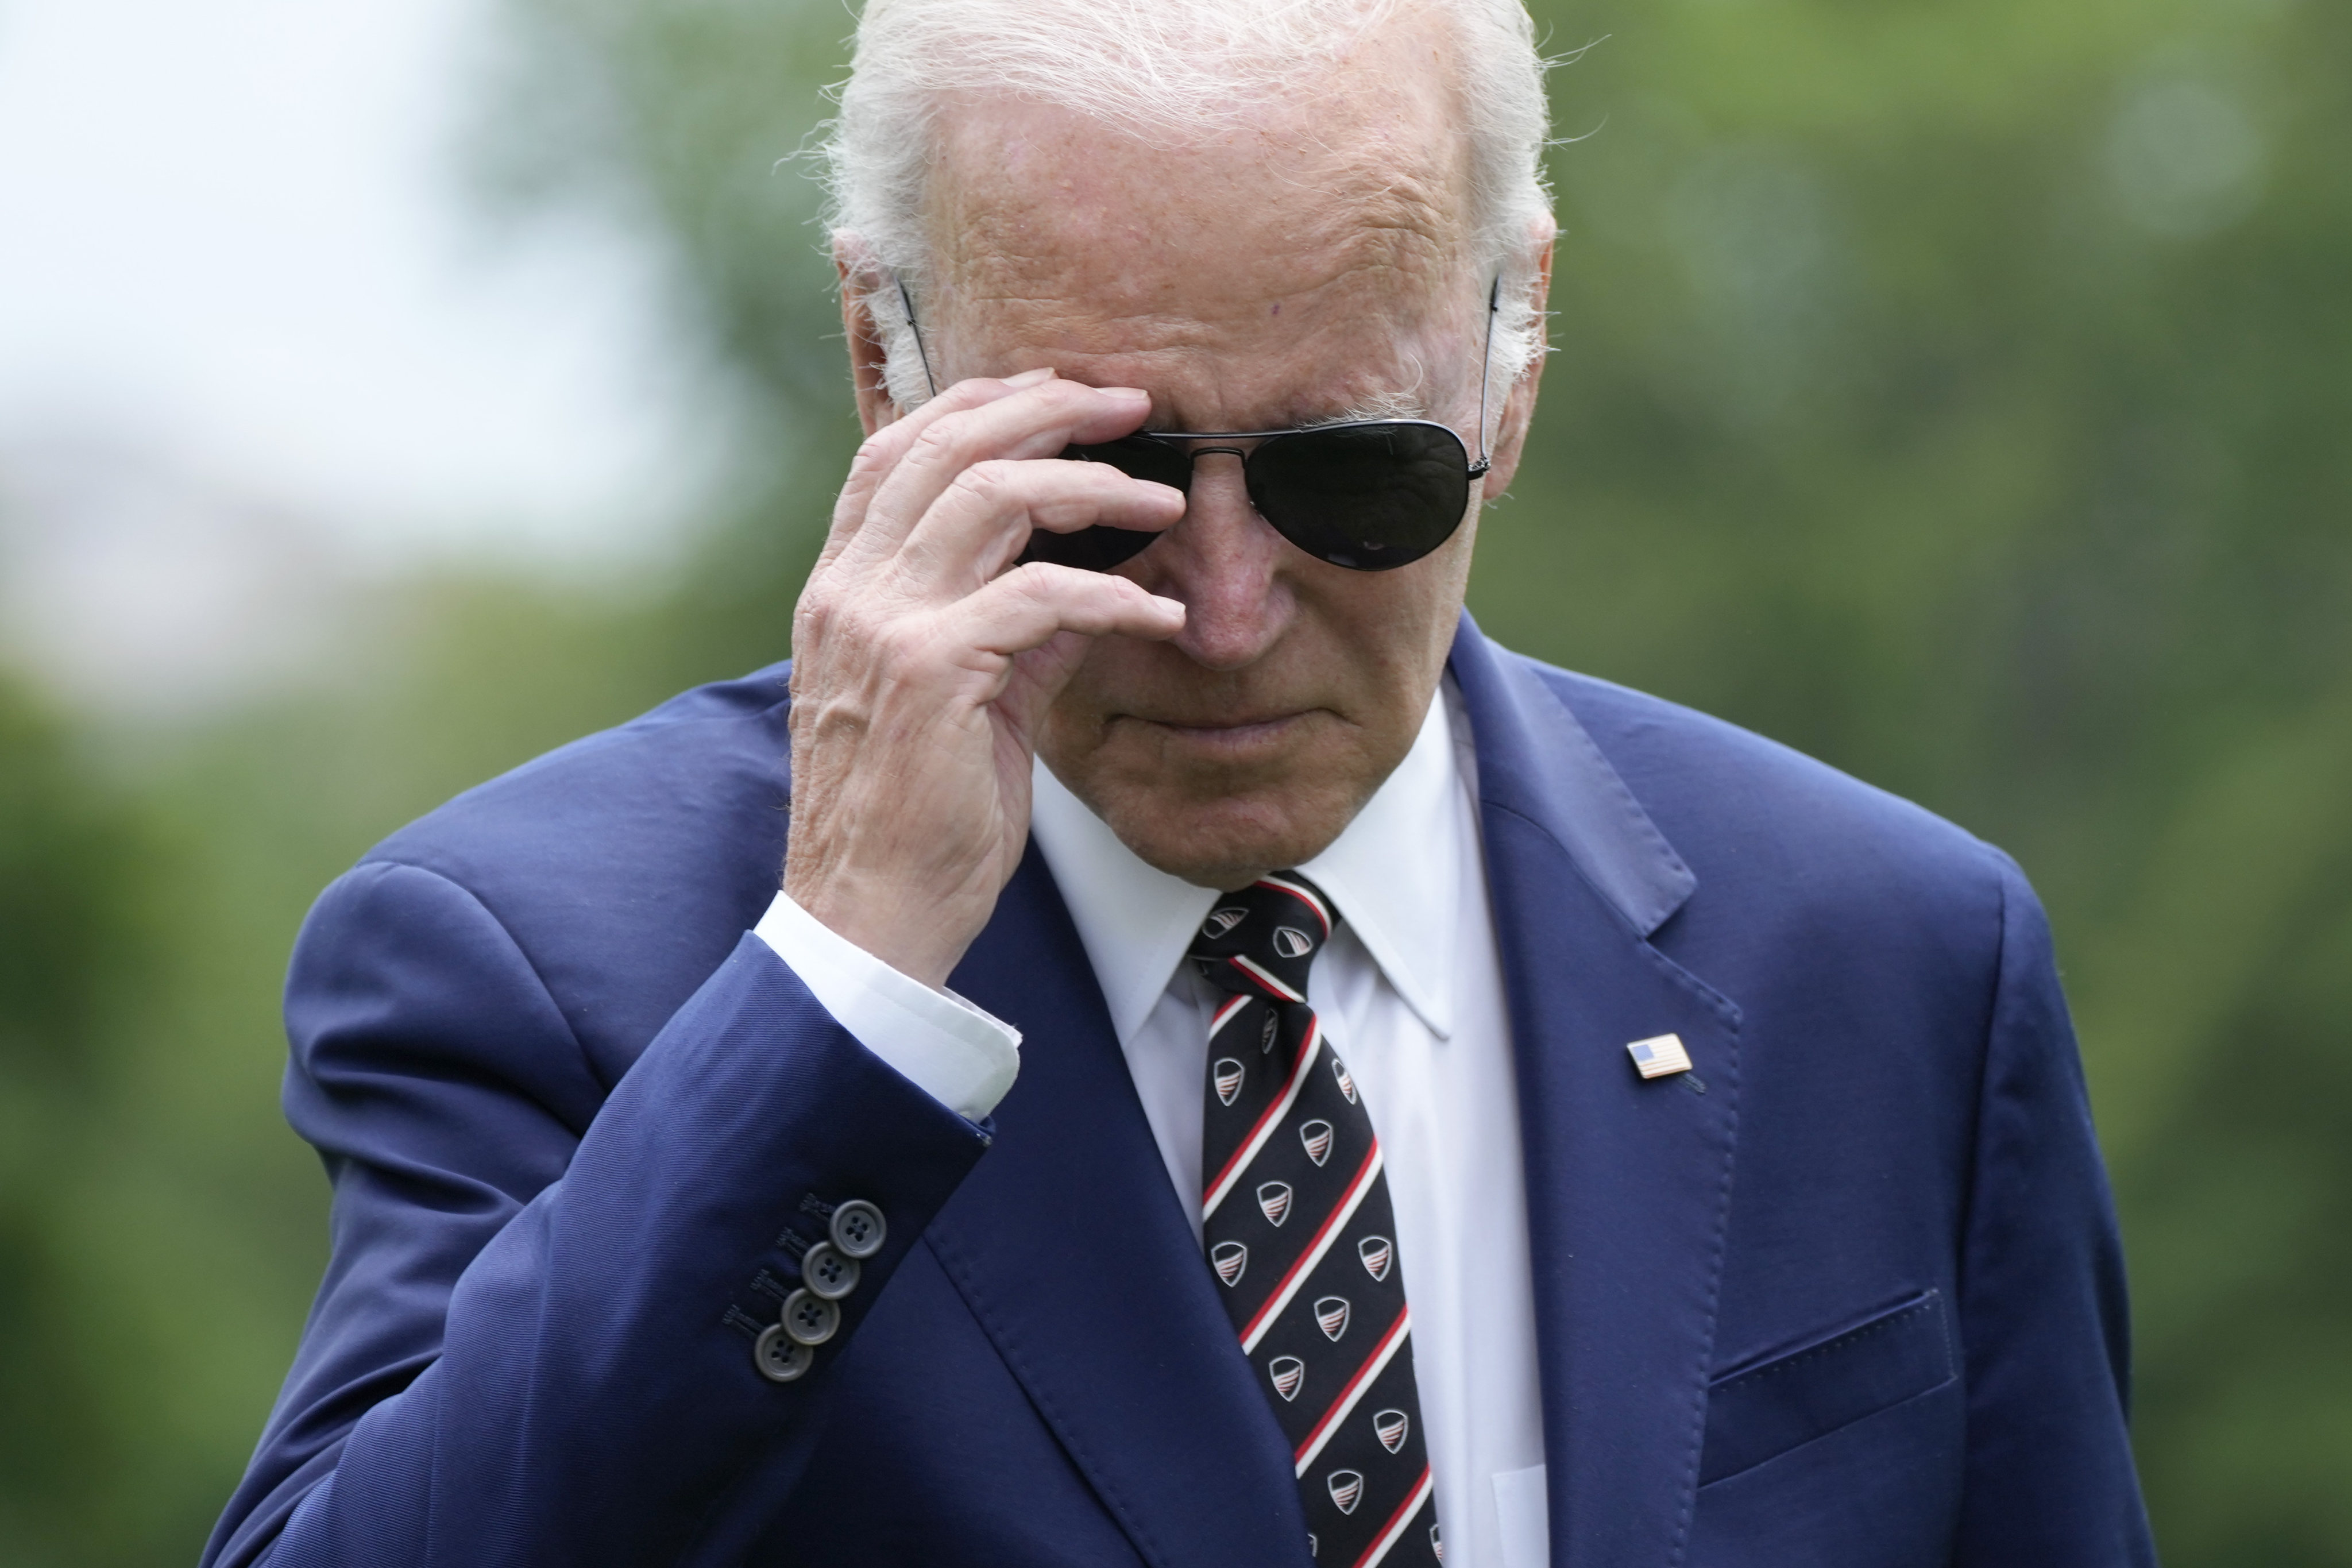 President Joe Biden removes his sunglasses as he walks to speak with reporters after returning to the White House in Washington on Sunday. Photo: AP